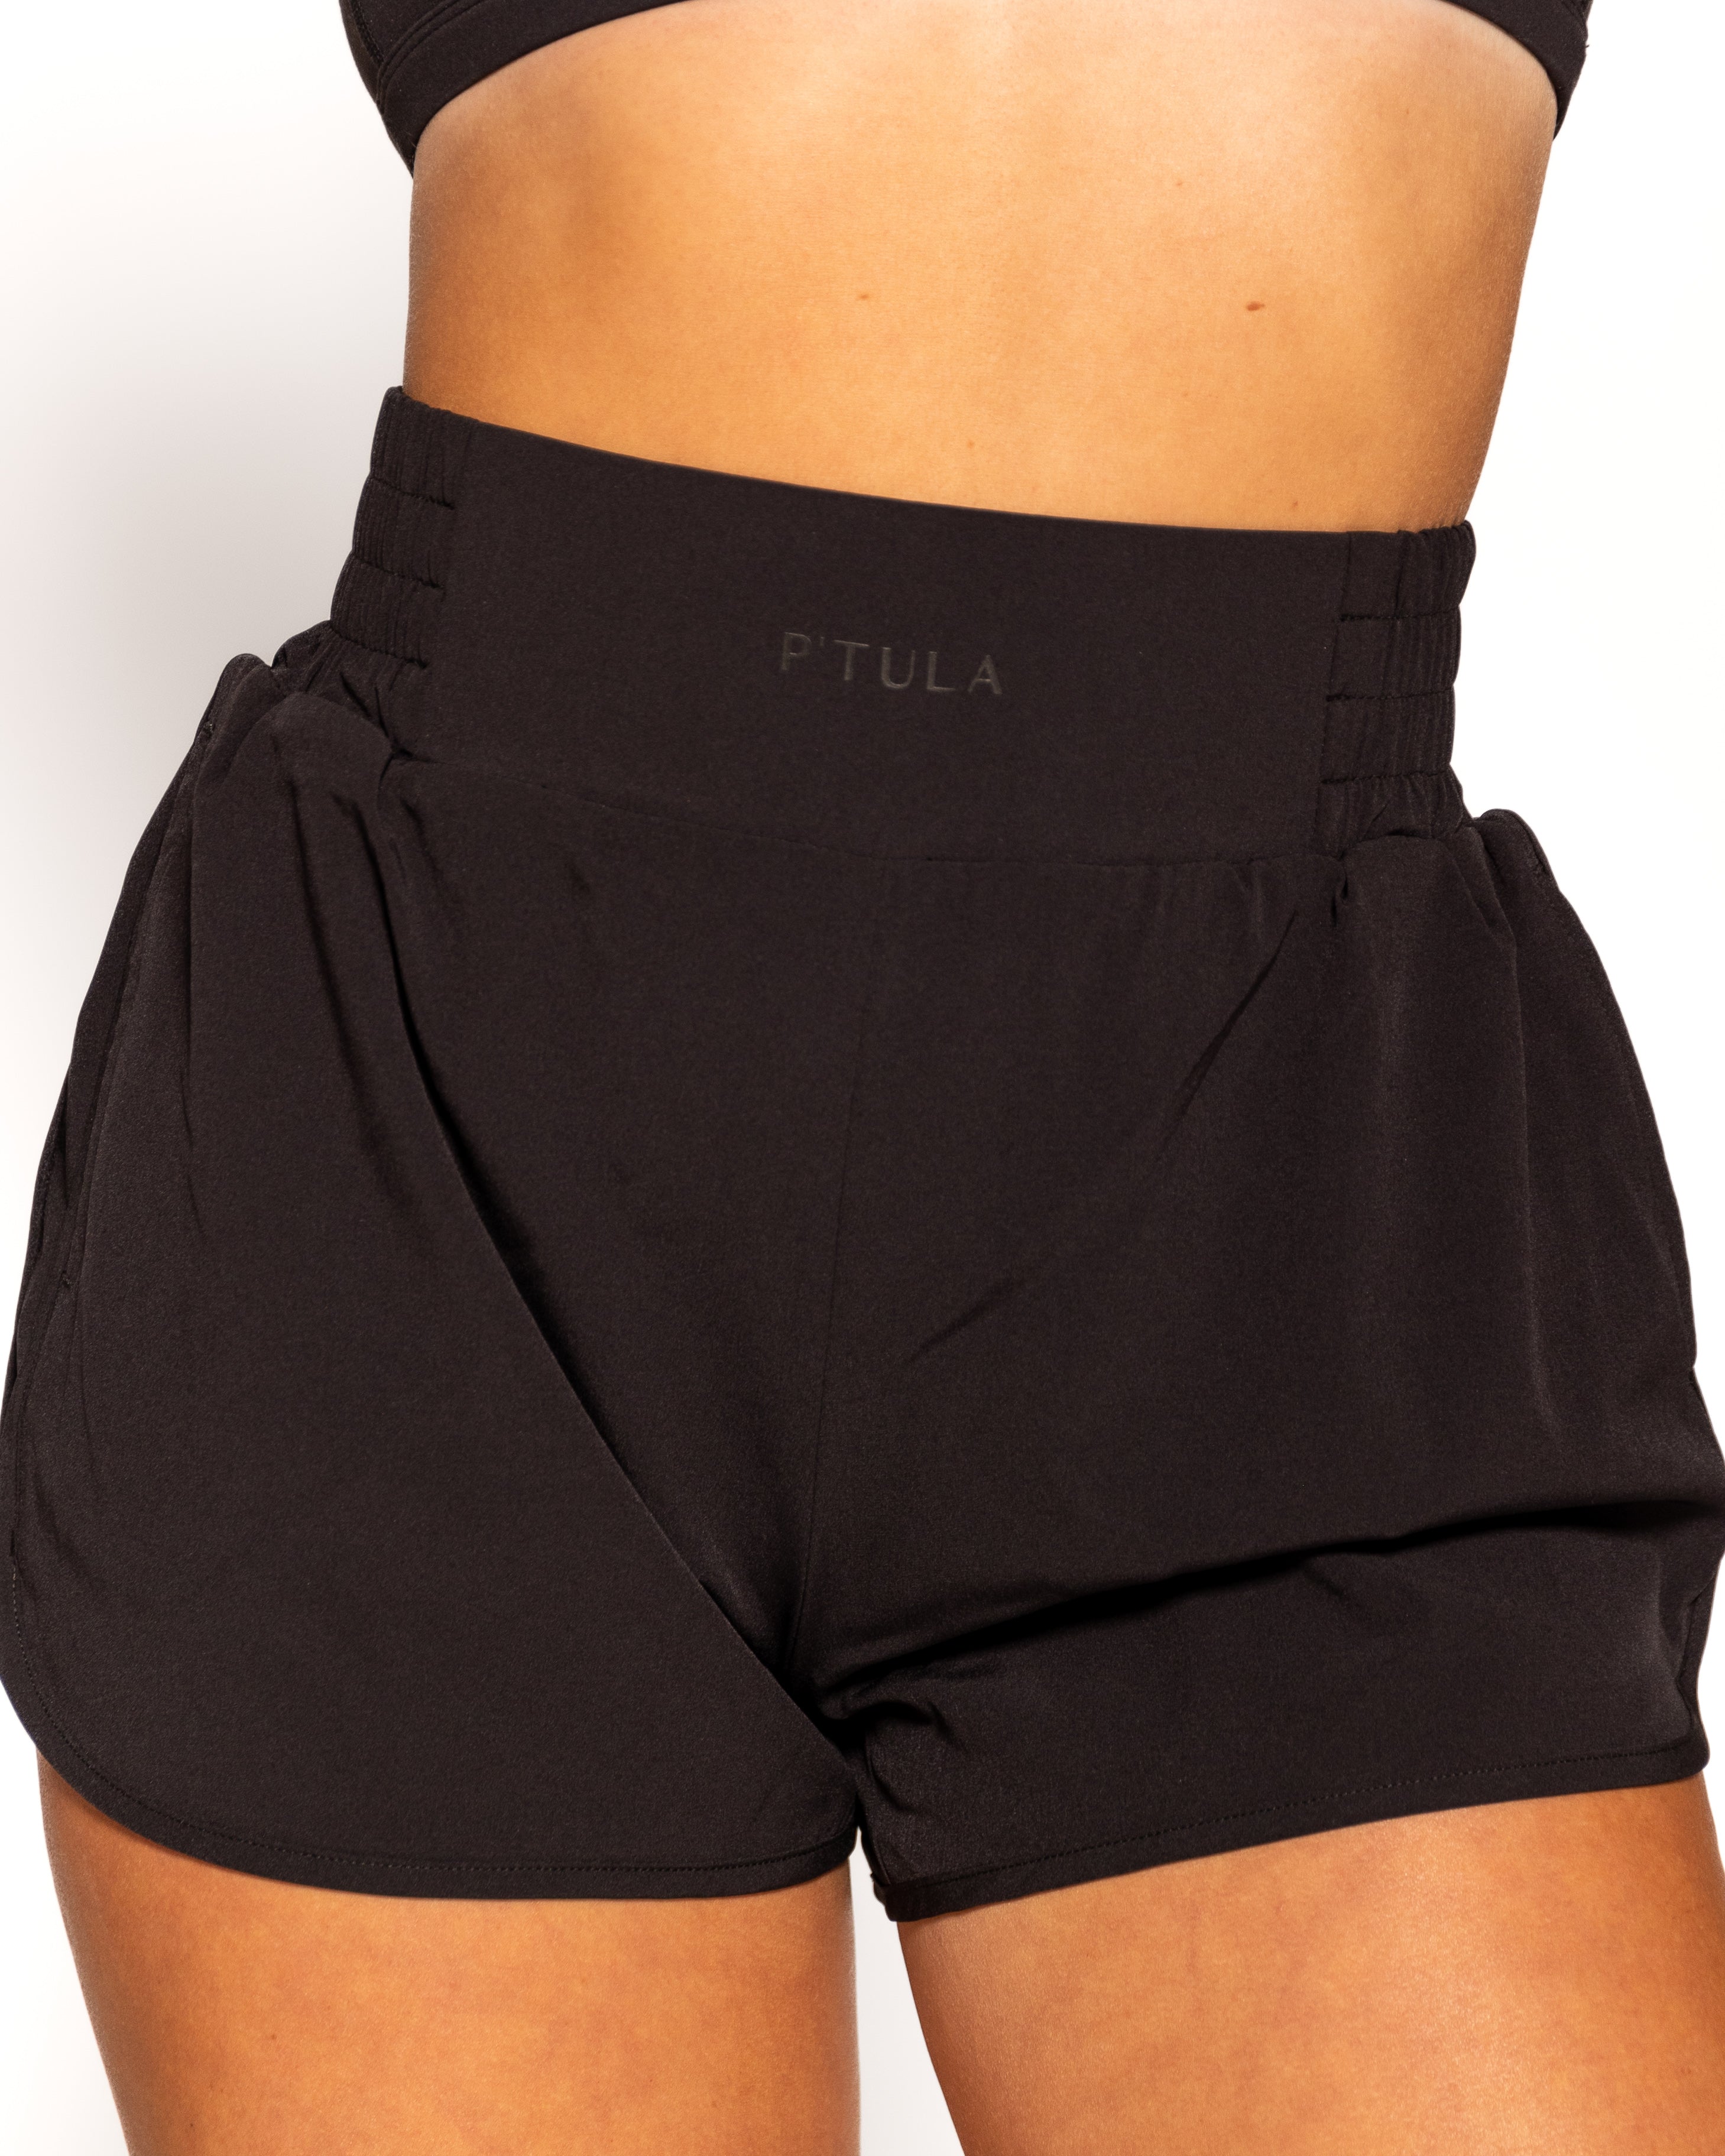 Has anyone tried P'tula Taylor (shorts). Are they made more for lounge or  performance? Do you like them? Love this color but Ptula can be so hit or  miss : r/gymsnark